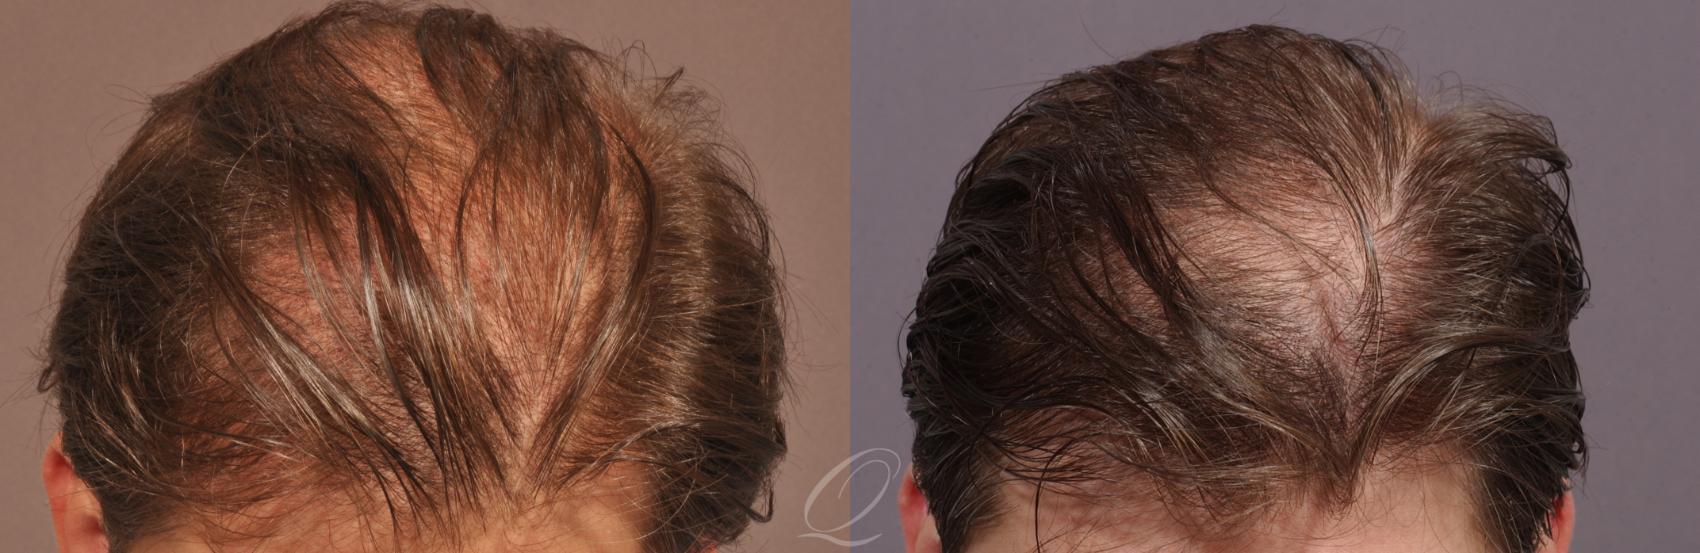 FUT Case 1030 Before & After View #2 | Rochester, Buffalo, & Syracuse, NY | Quatela Center for Hair Restoration